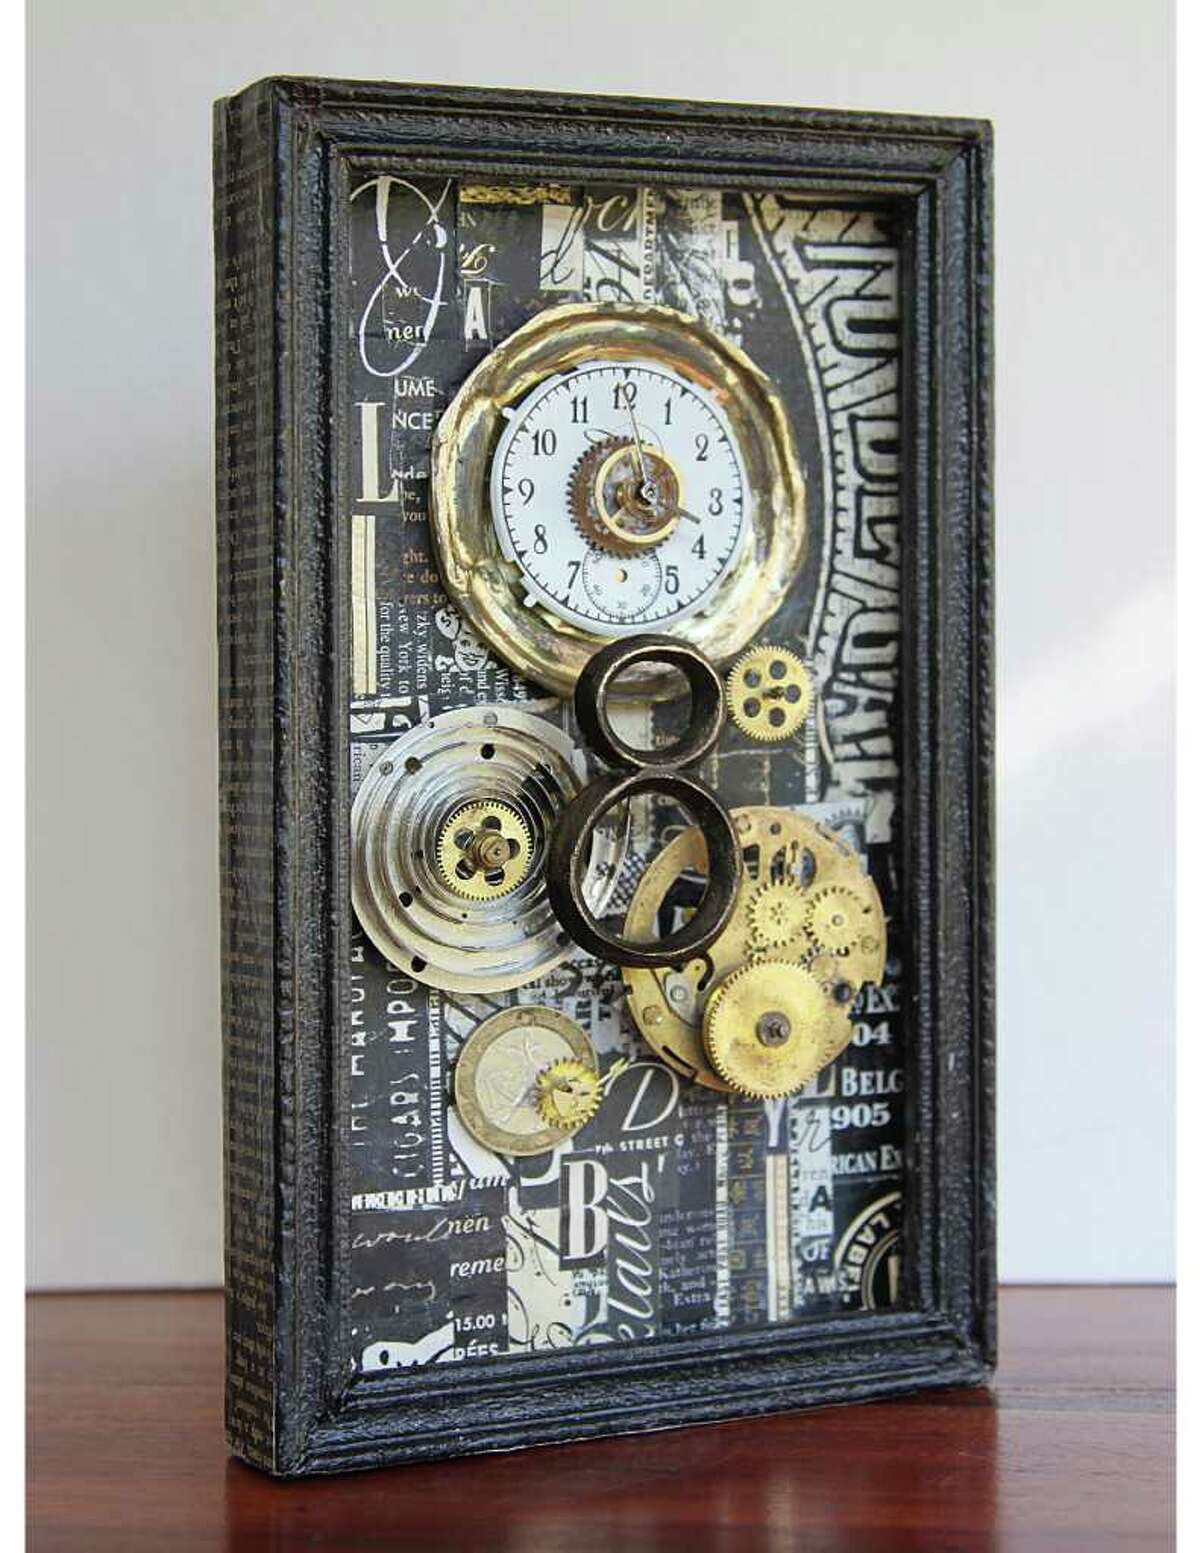 Wilton resident Amy Schottís From Here to There "No. 8," a black and white work with antique clock parts.